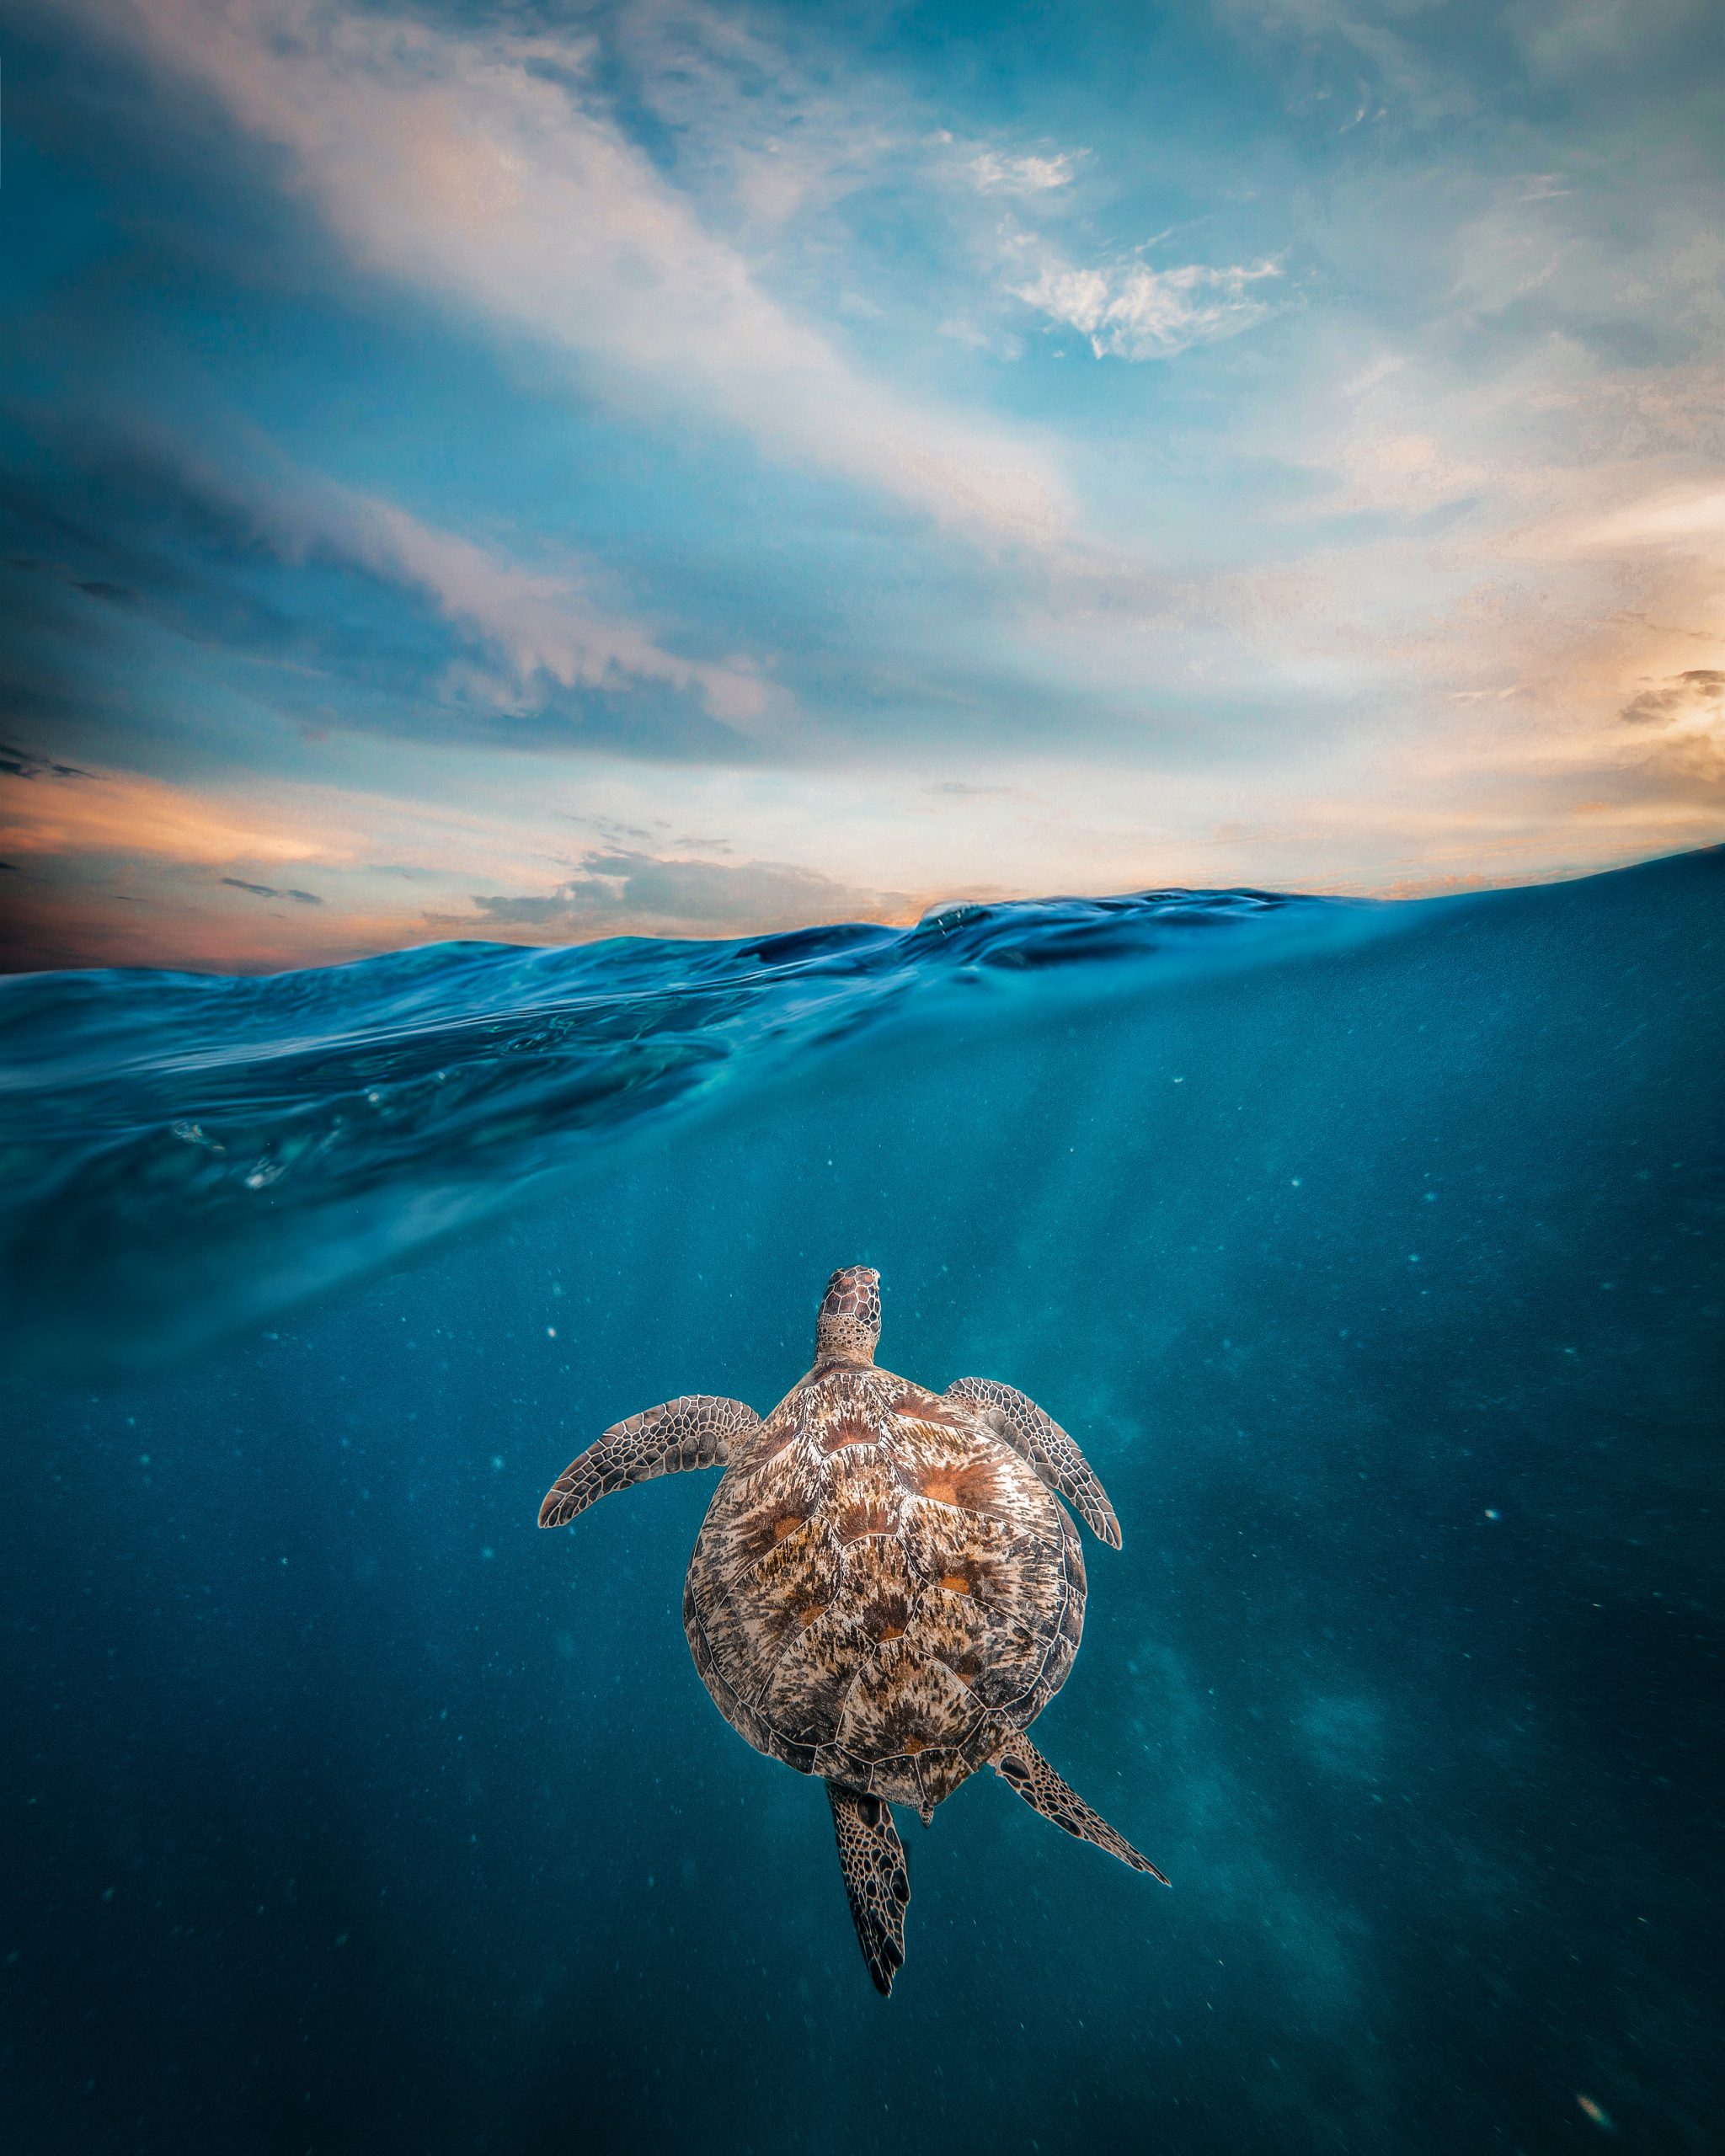 Photo by Stijn Dijkstra: https://www.pexels.com/photo/a-turtle-submerged-in-blue-water-7177188/